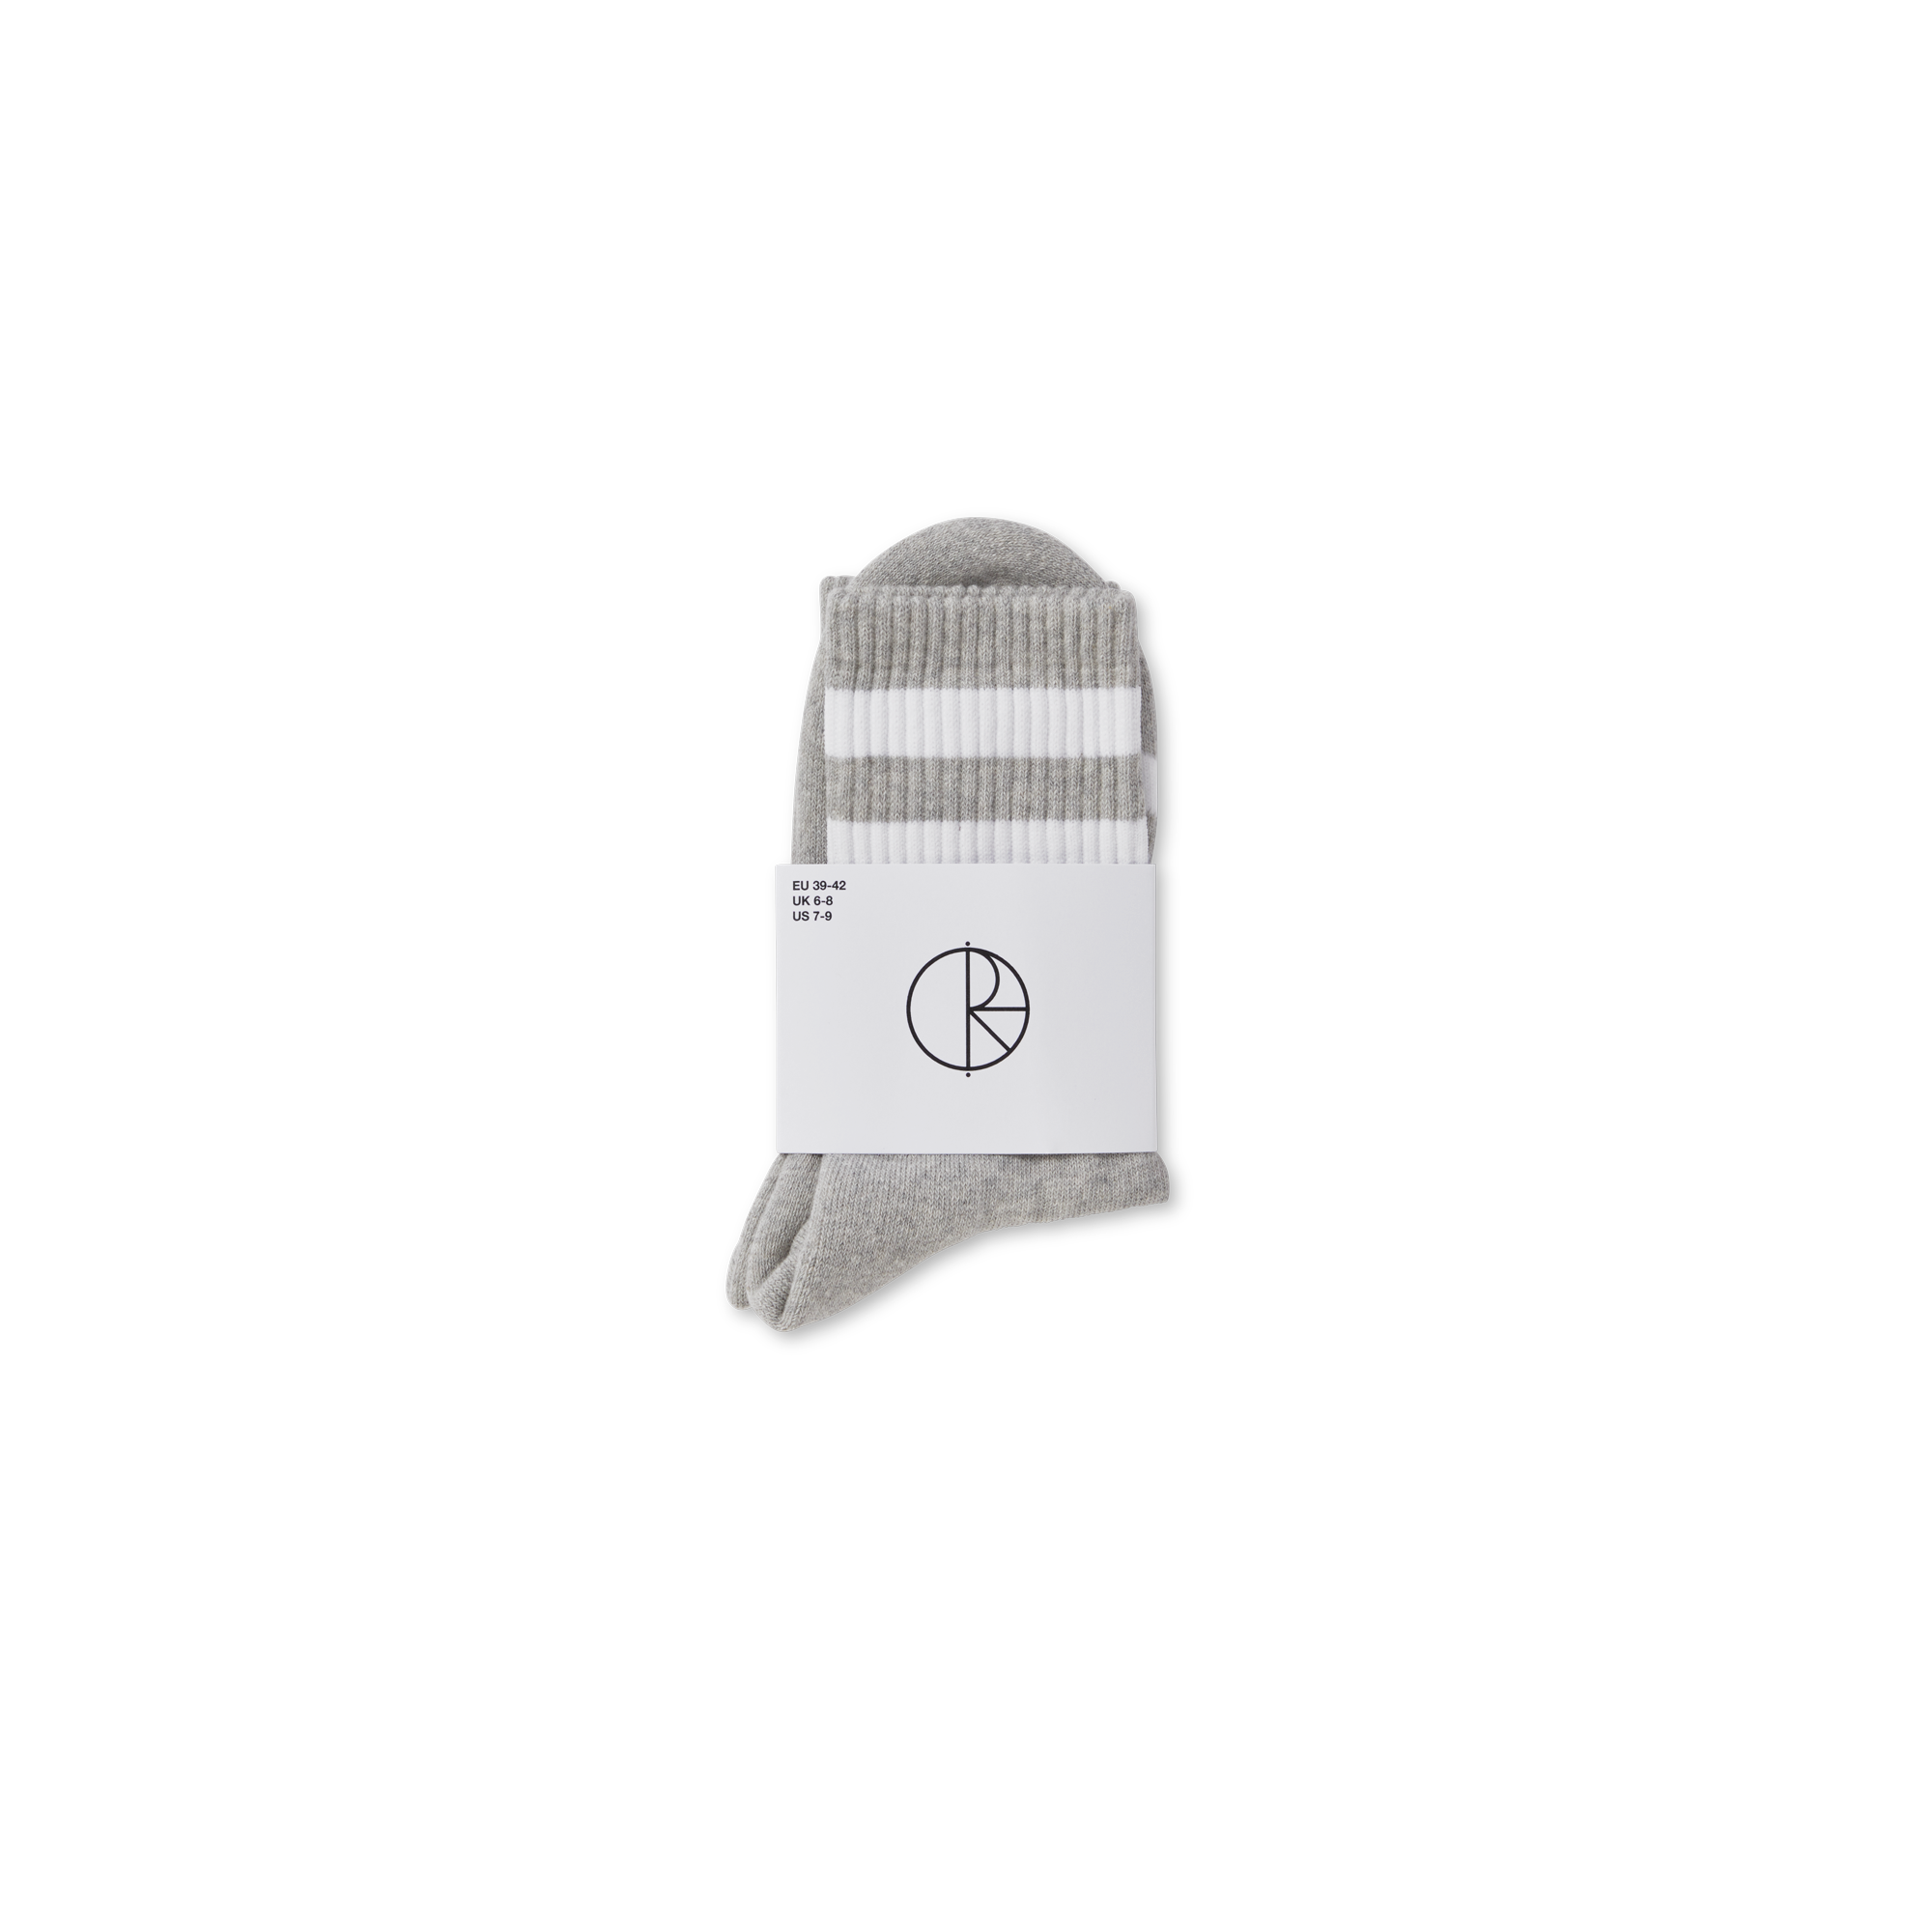 Grey polar rib socks with white stripes and smiling and frowning face logos. Free delivery on items over £50